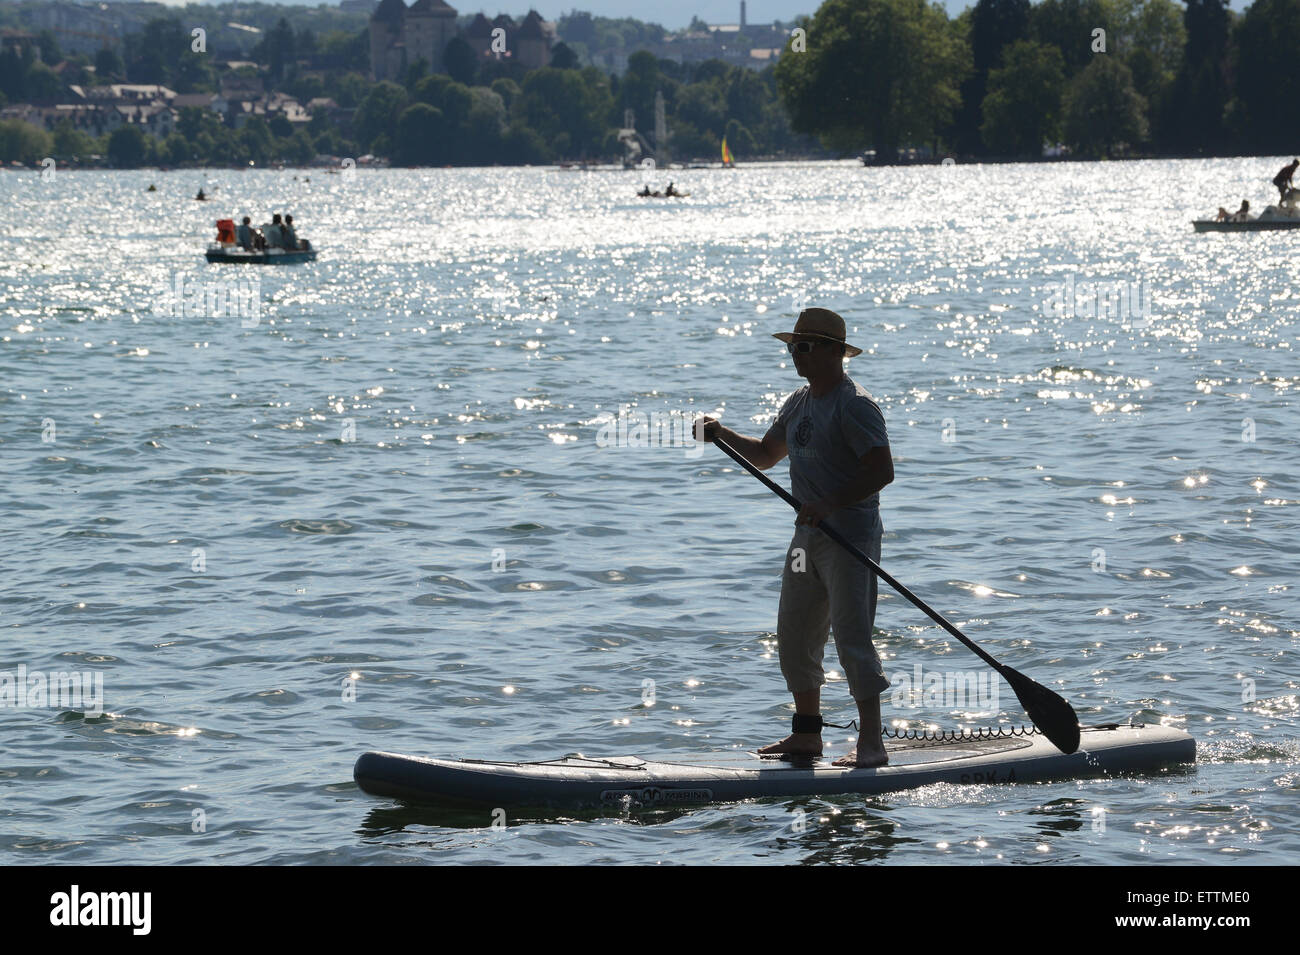 Stand up paddle surfing or standing paddle boarding on Lake Annecy in France Stock Photo